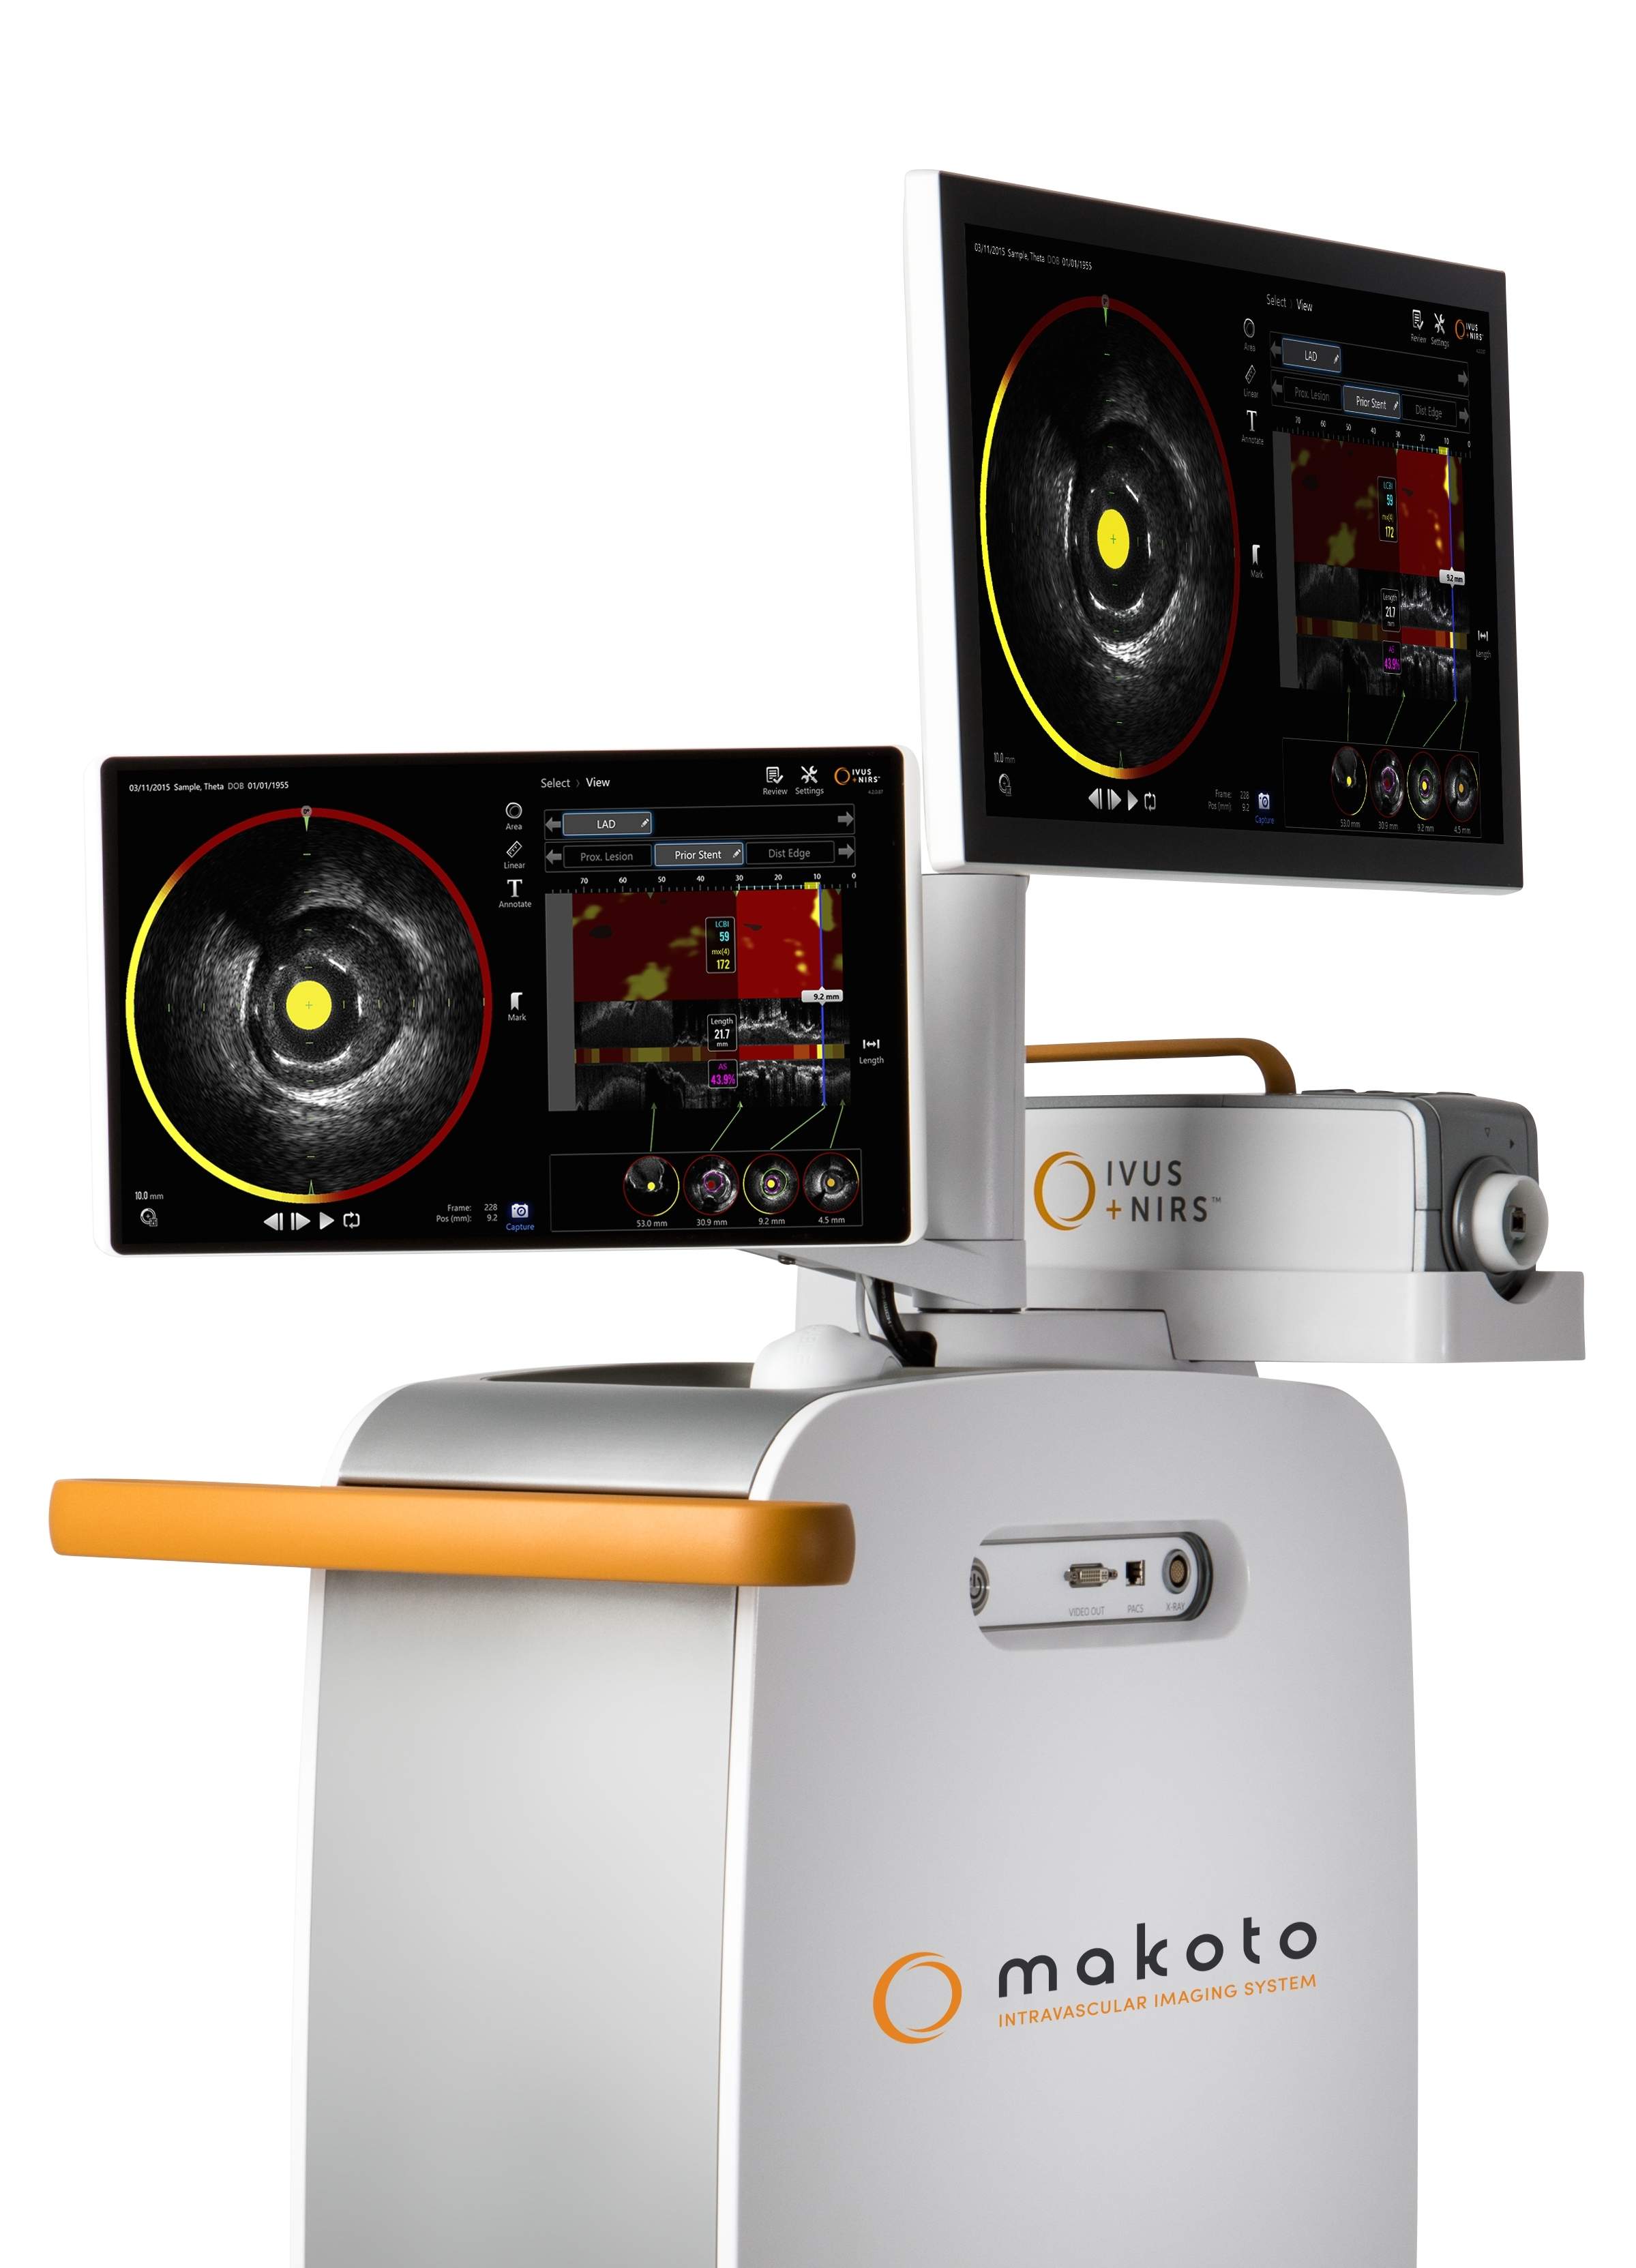 Infraredx launches Makoto intravascular imaging system in Japan